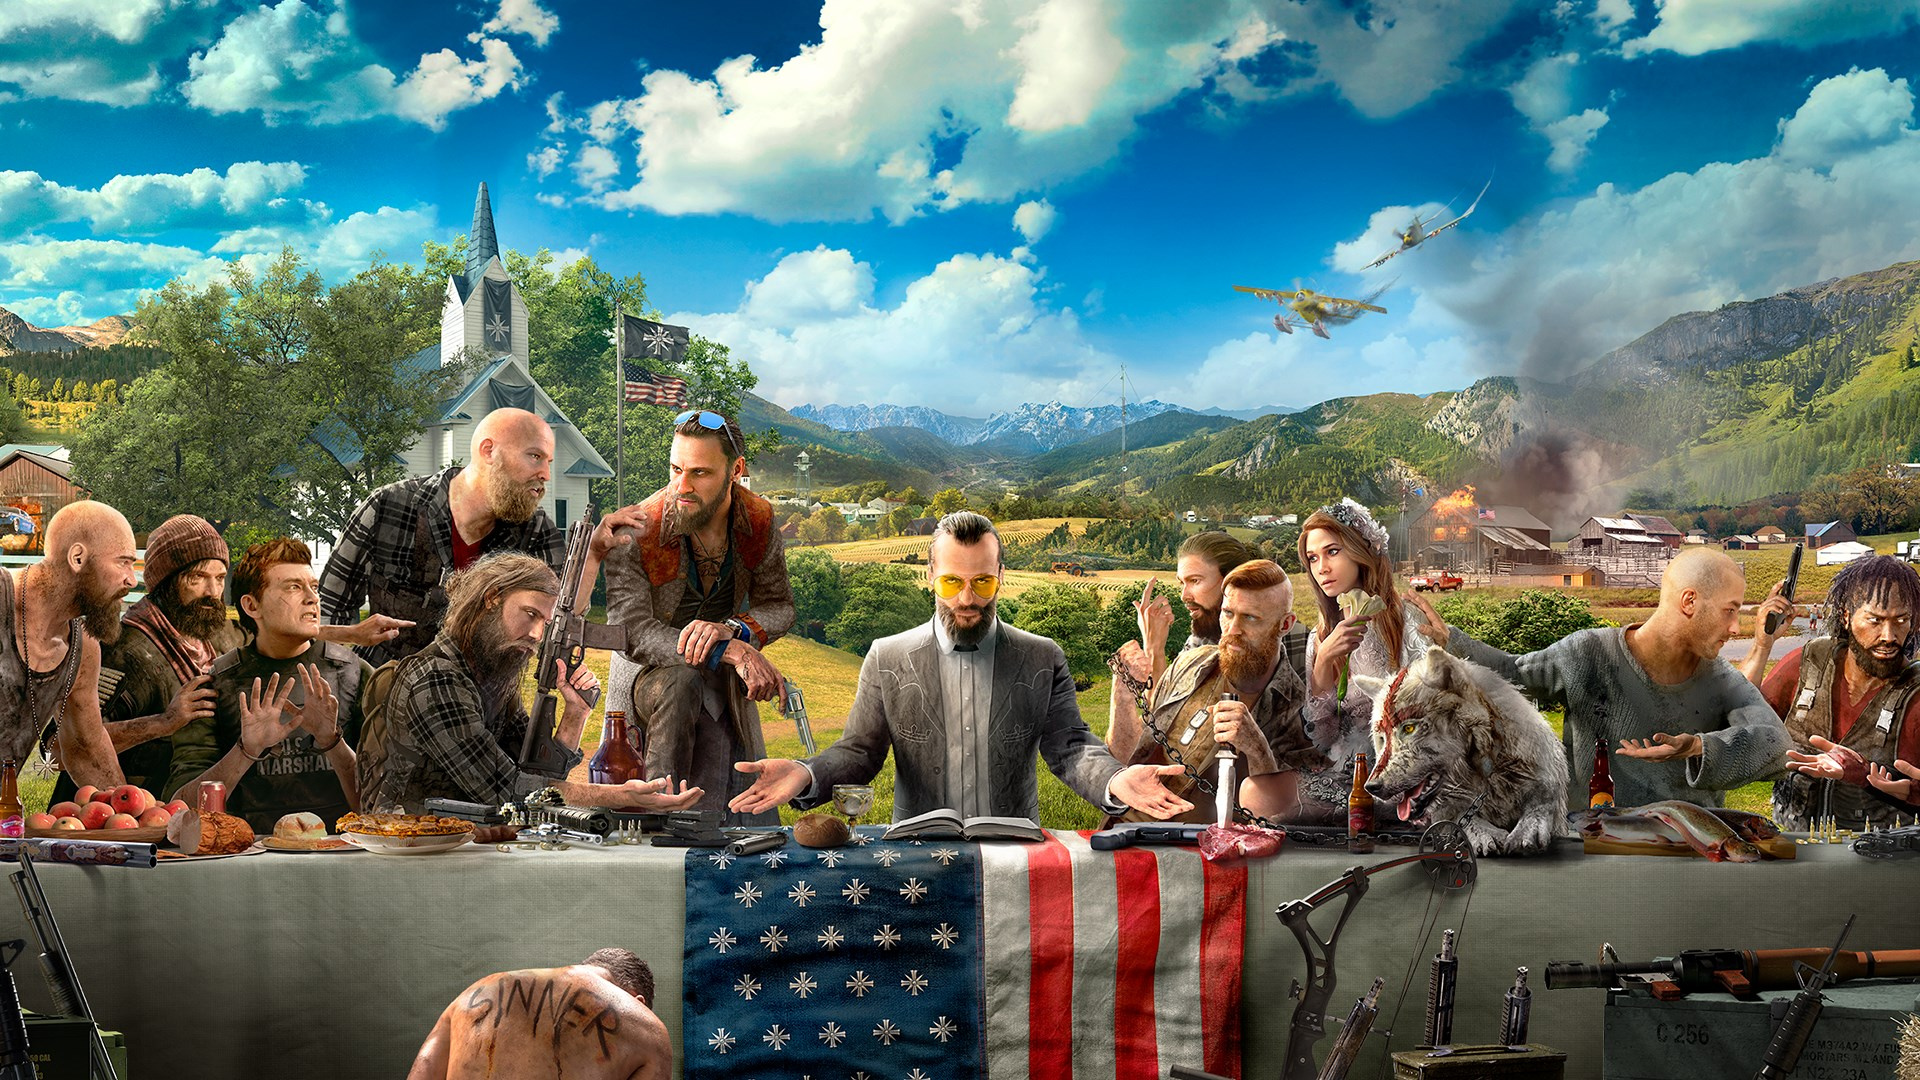 far cry 5 ps store